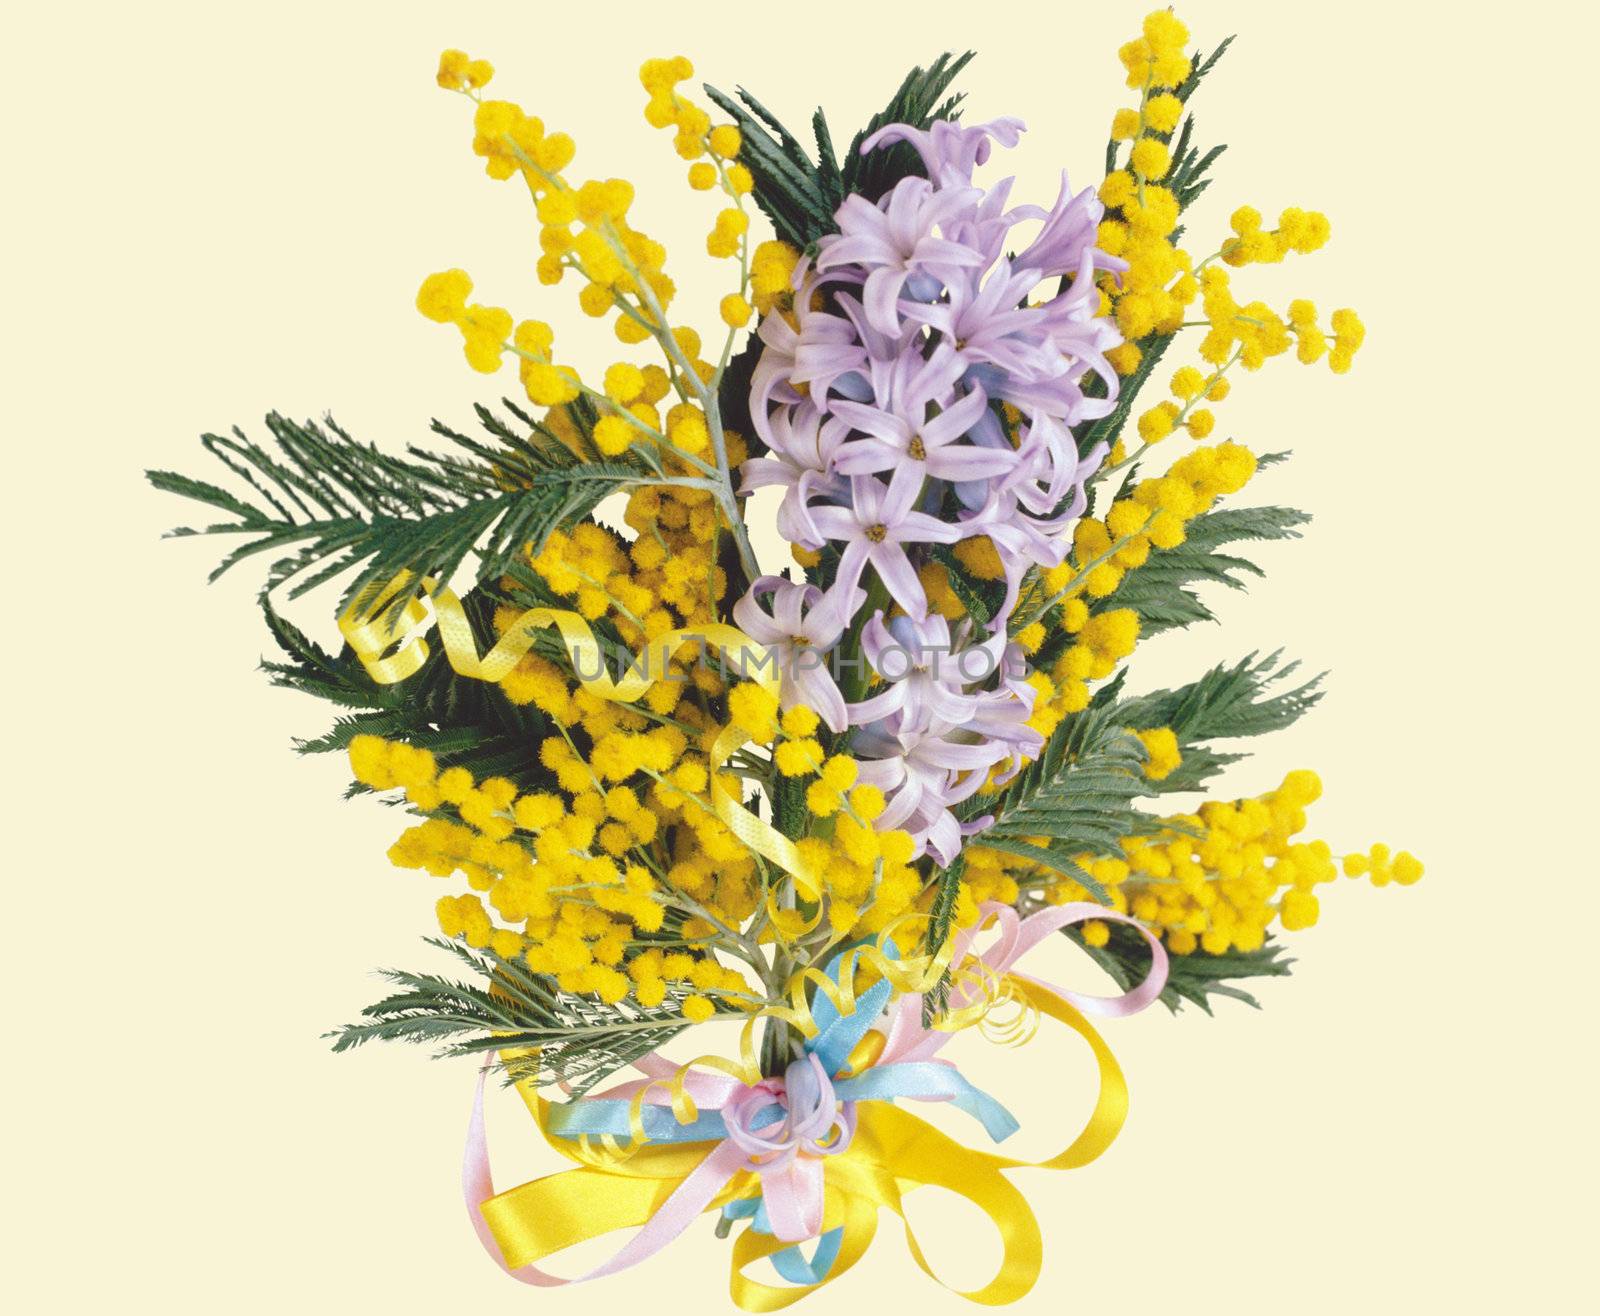 Nice spring flowers for your Mather Days design